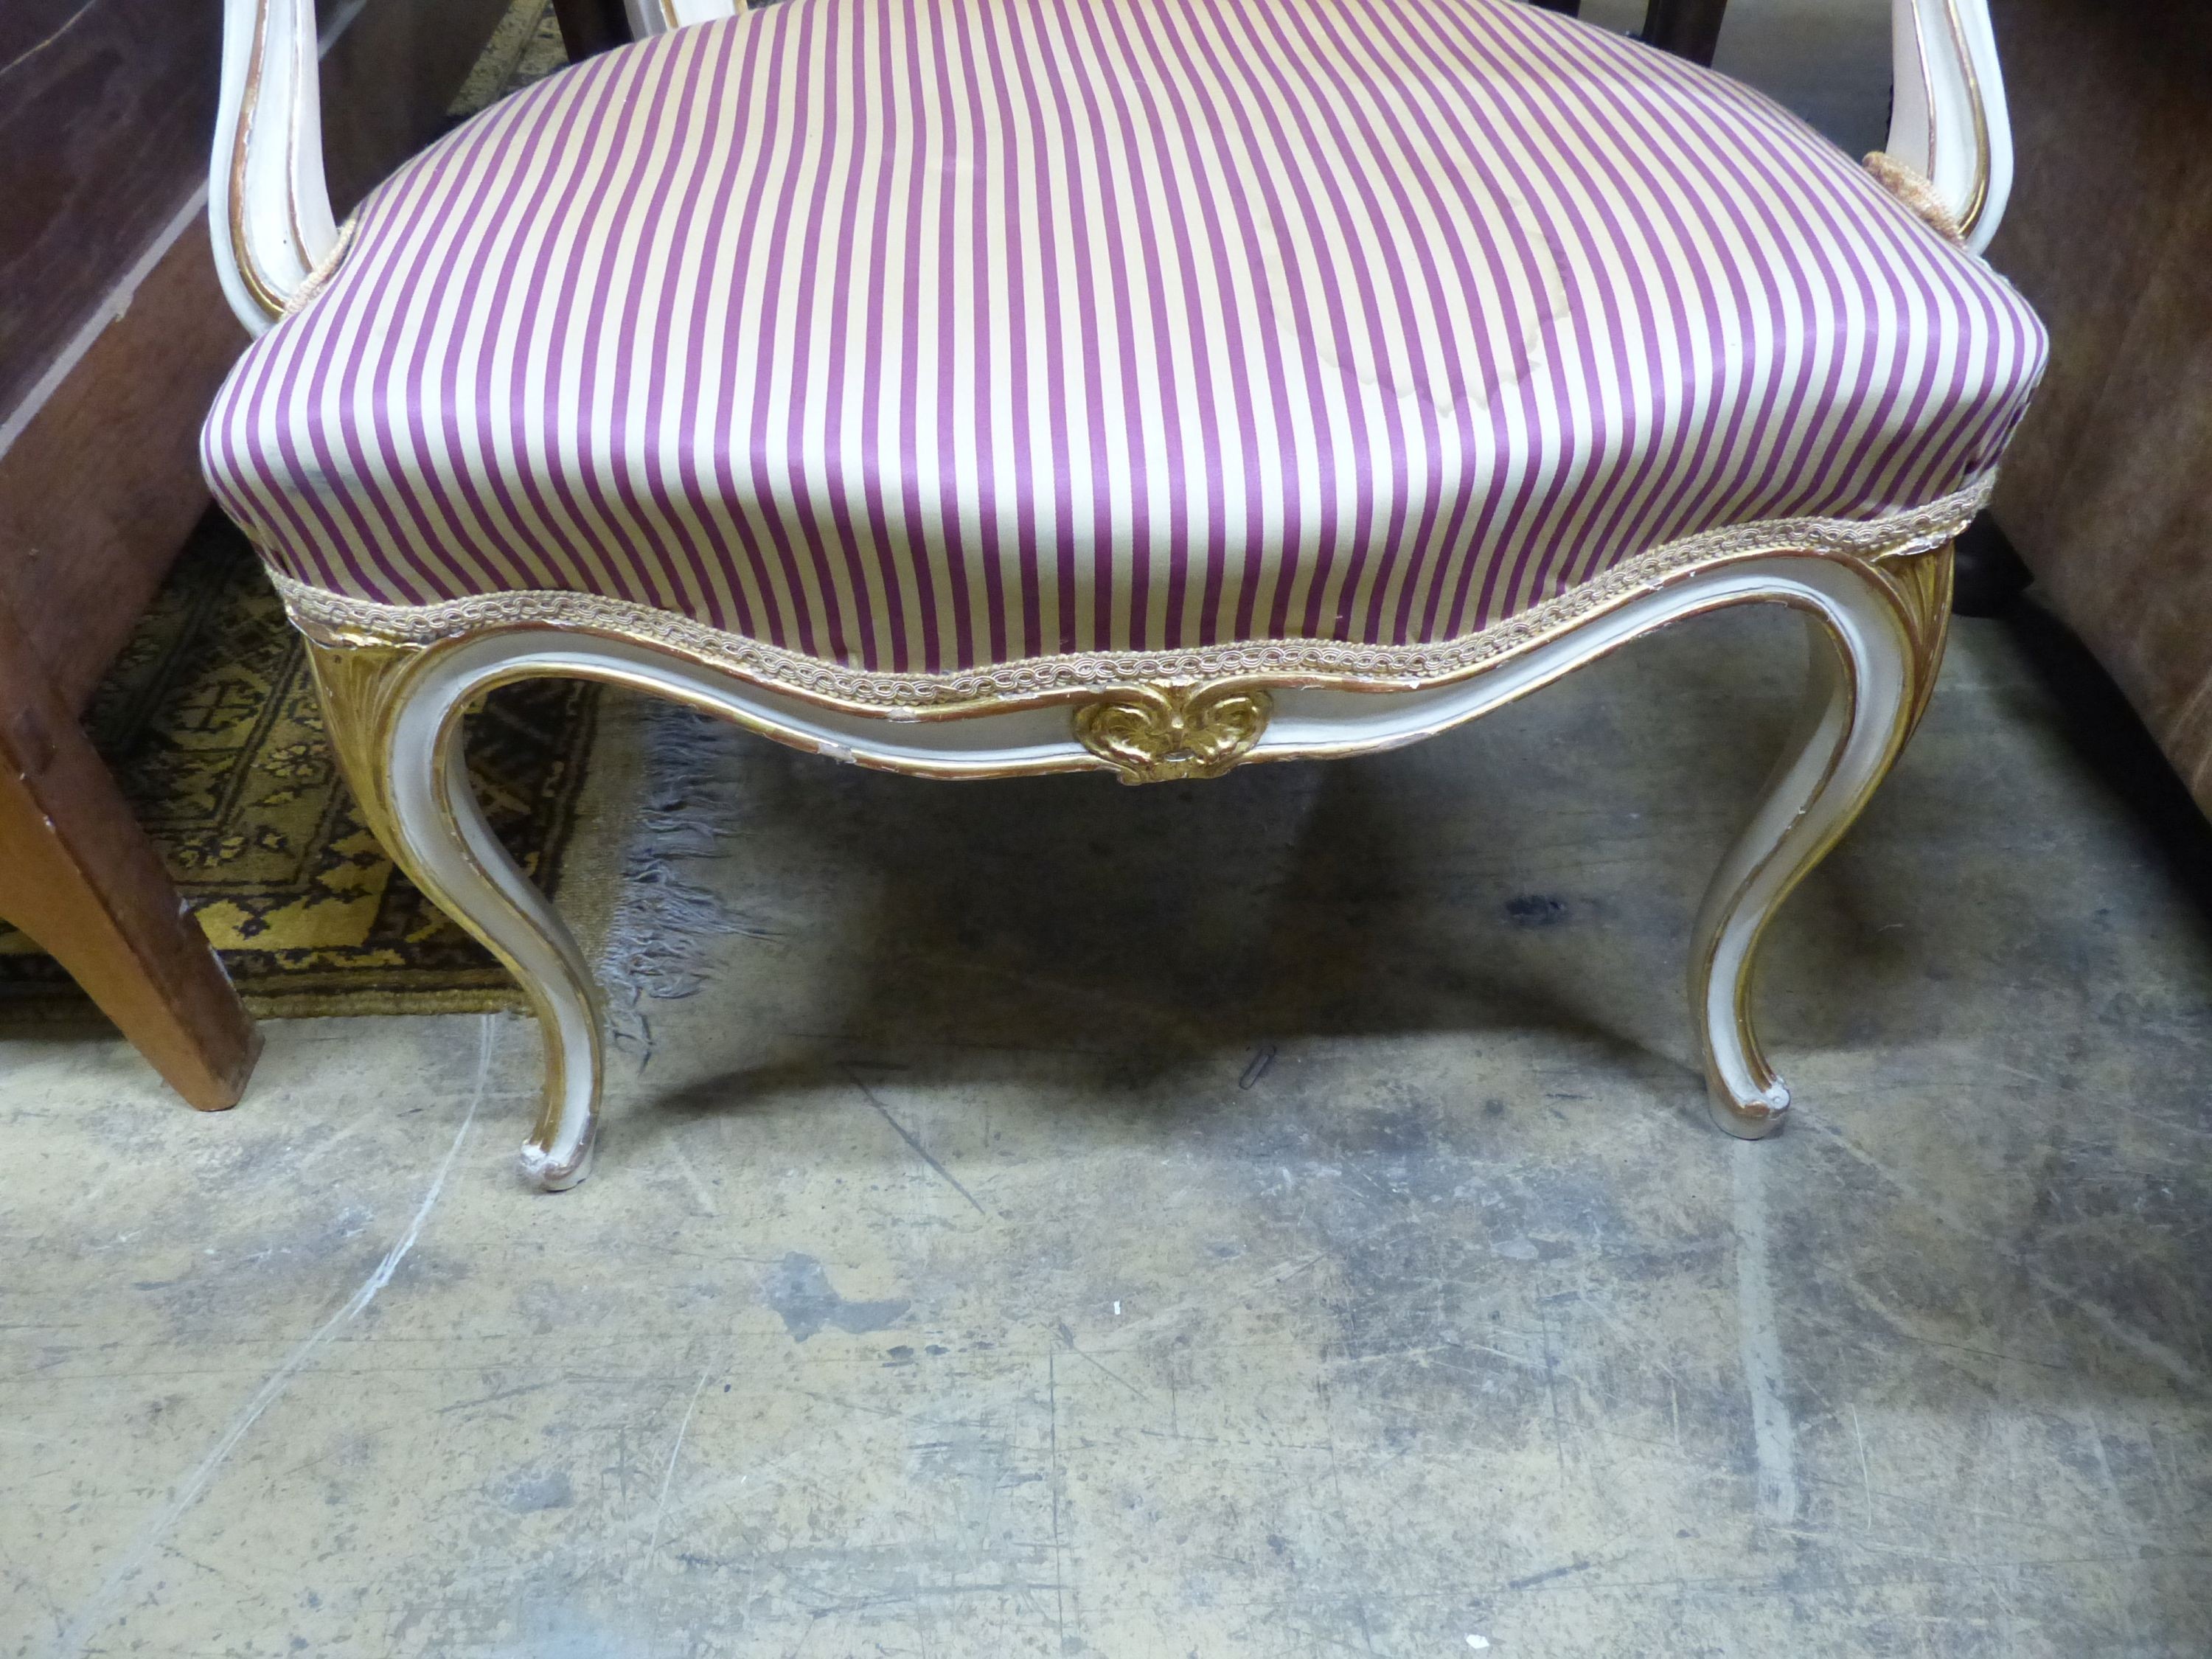 A 19th century French Louis XV style parcel gilt, cream painted fauteuil, with striped upholstery.